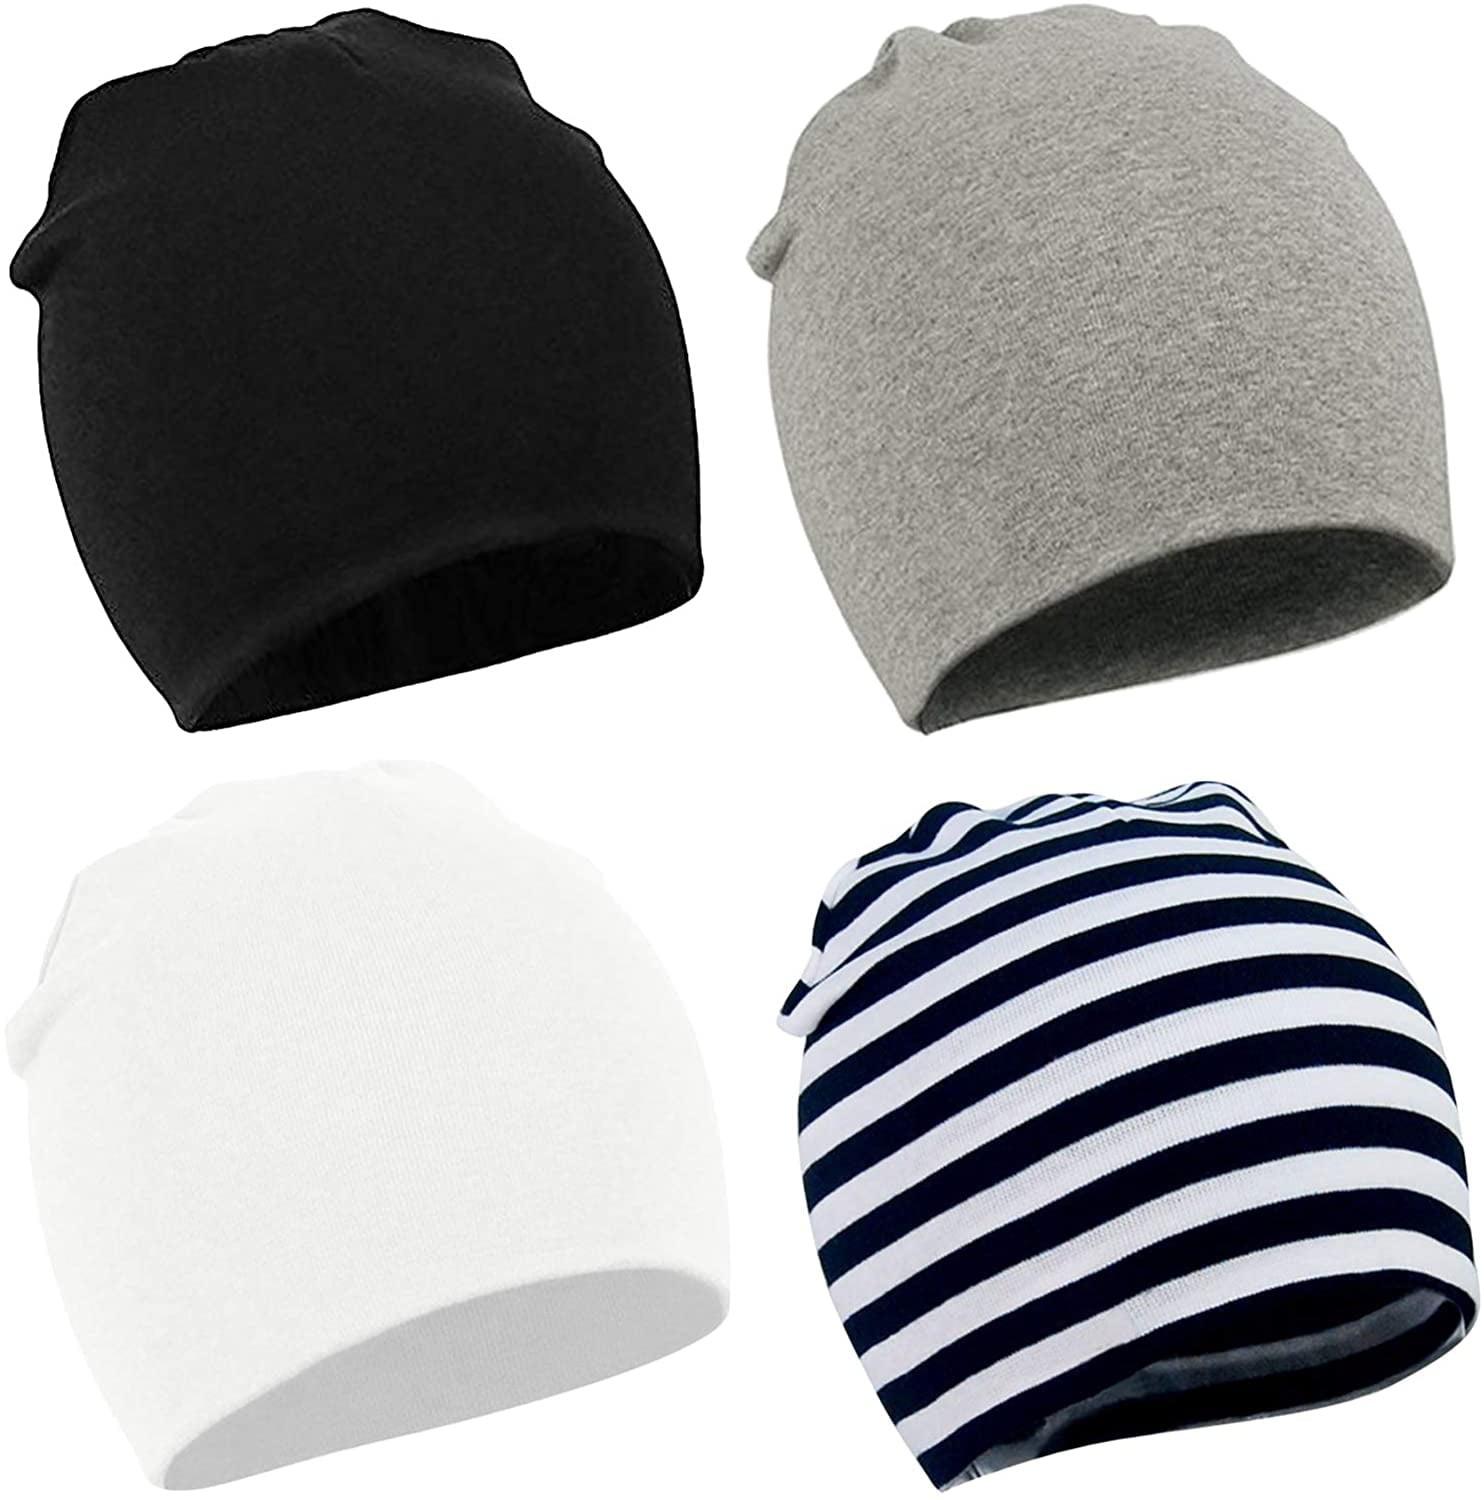 Zando Baby Cotton Beanies for Boys Toddler Knit Hats Cute Warm Infant Beanies for Baby Girls Newborn Caps for Baby Boy